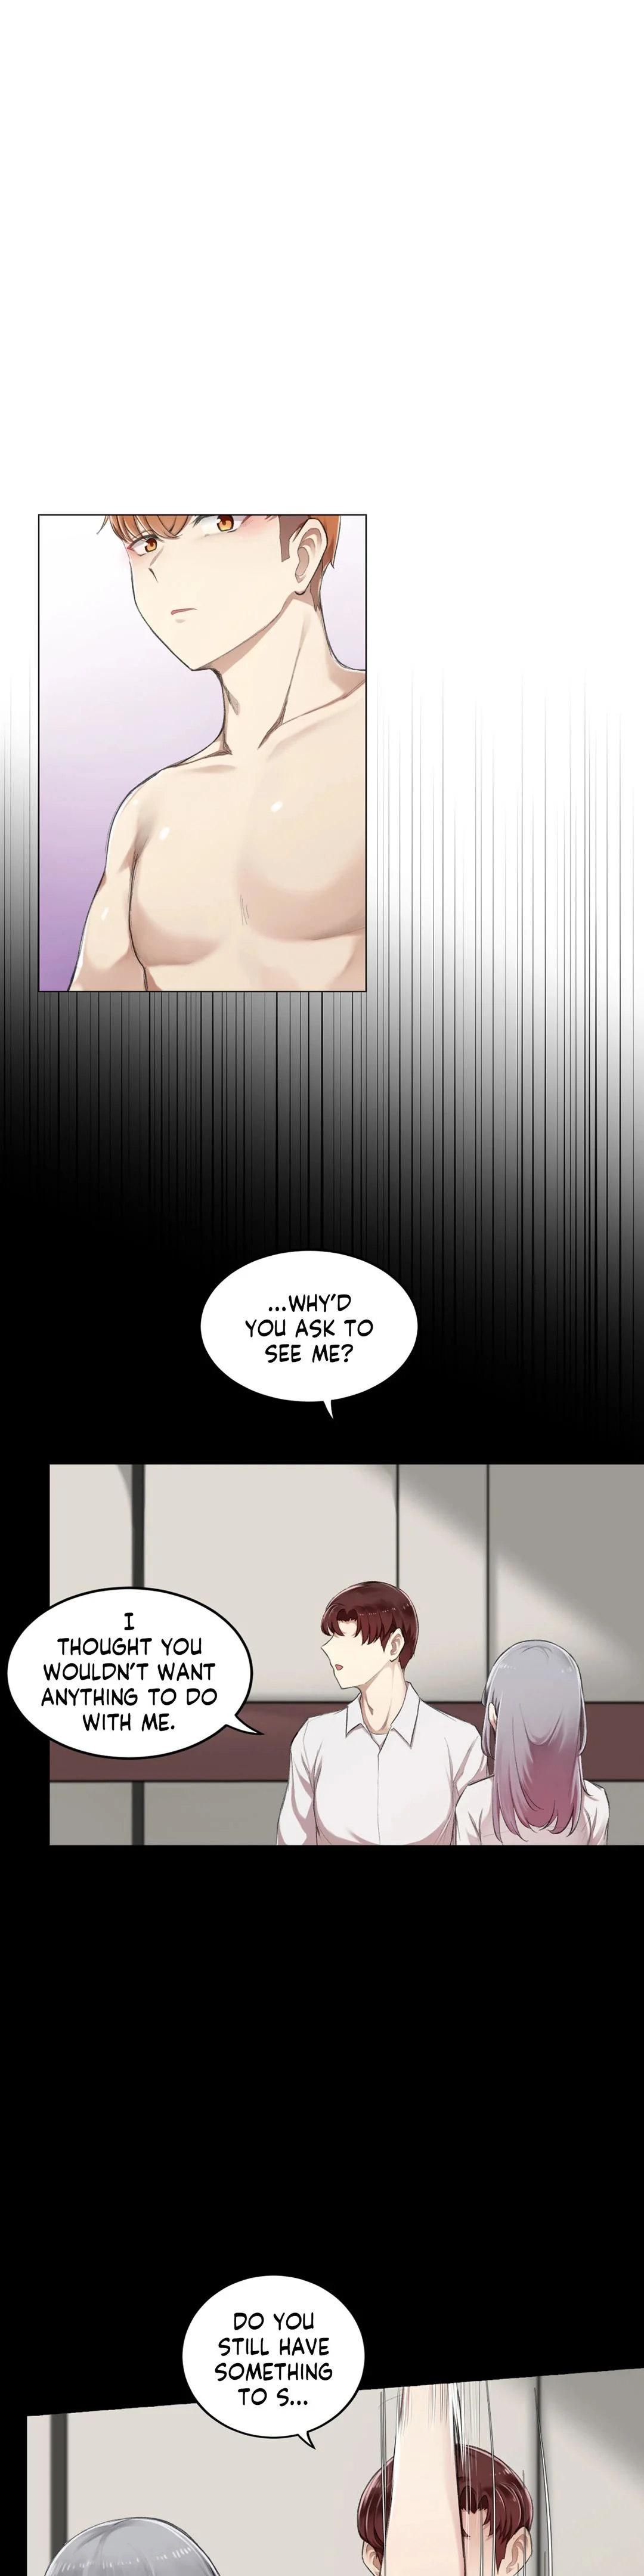 [Dumangoon, KONG_] Sexcape Room: Snap Off Ch.7/7 [English] [Manhwa PDF] Completed 184